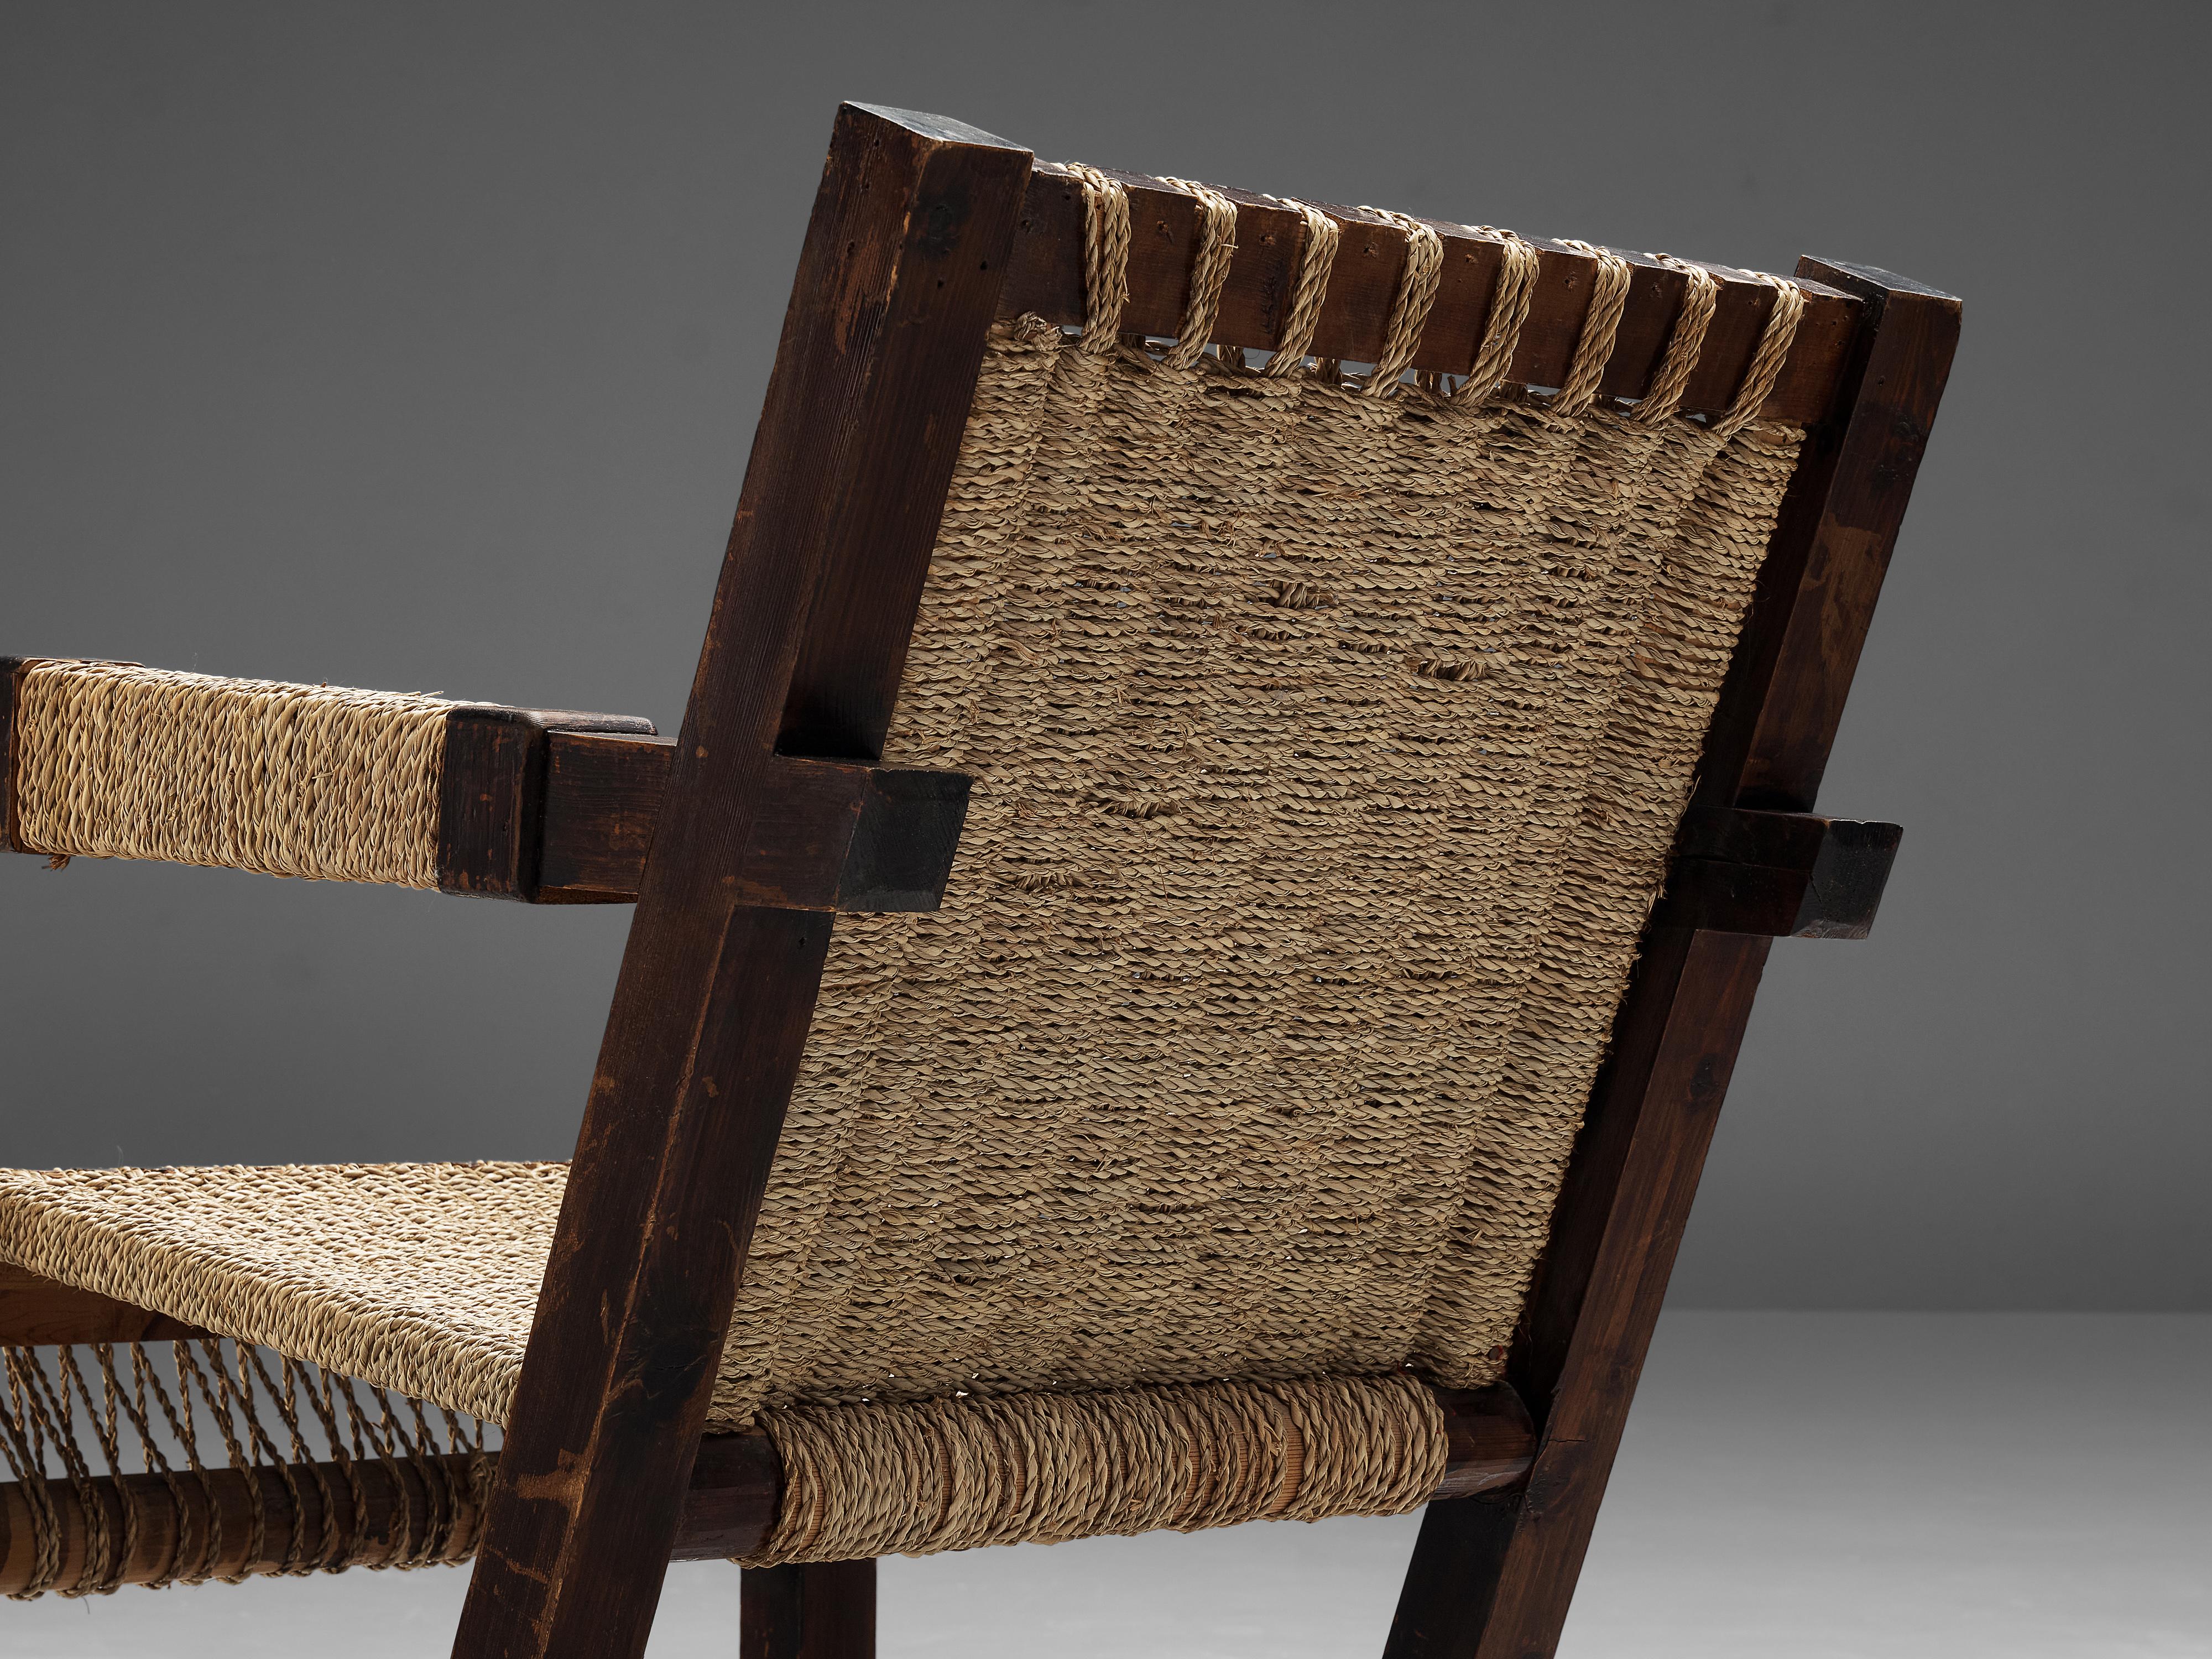 Rope Francis Jourdain Pair of Lounge Chair with Woven Details